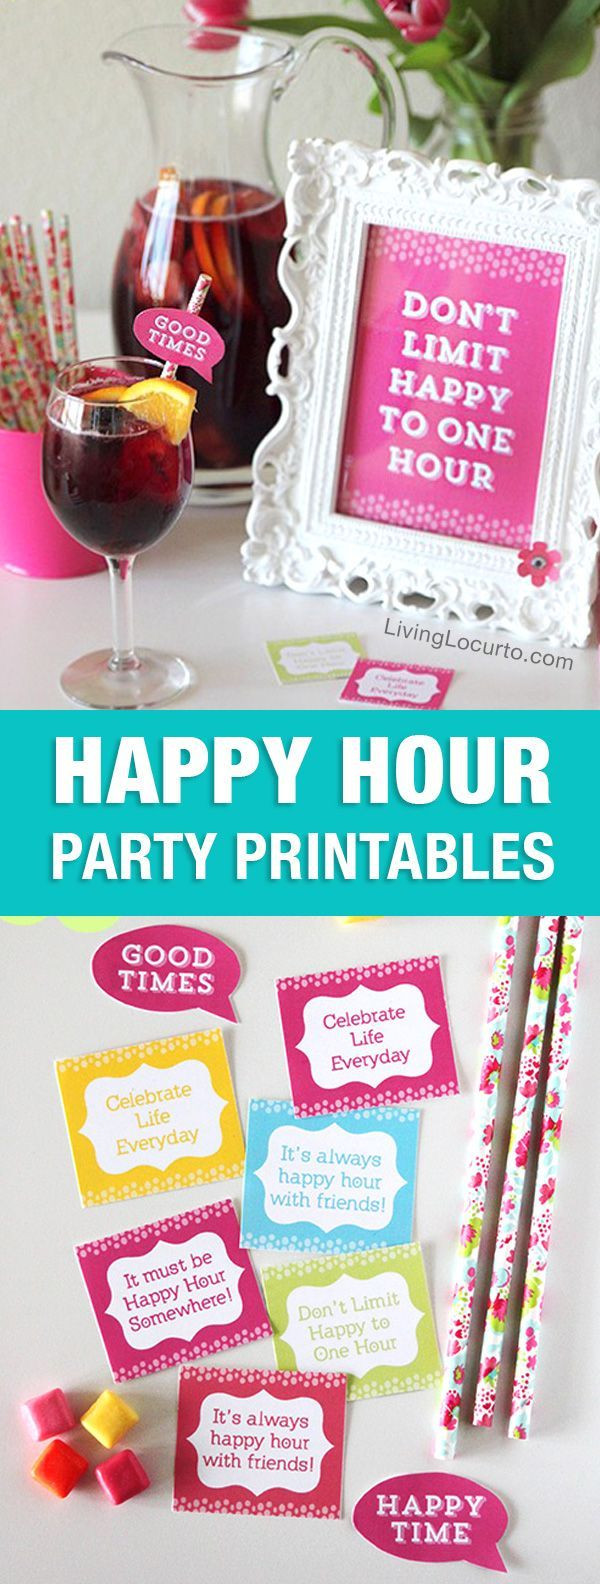 Christmas Happy Hour Party Ideas
 Fun Happy Hour Party Ideas